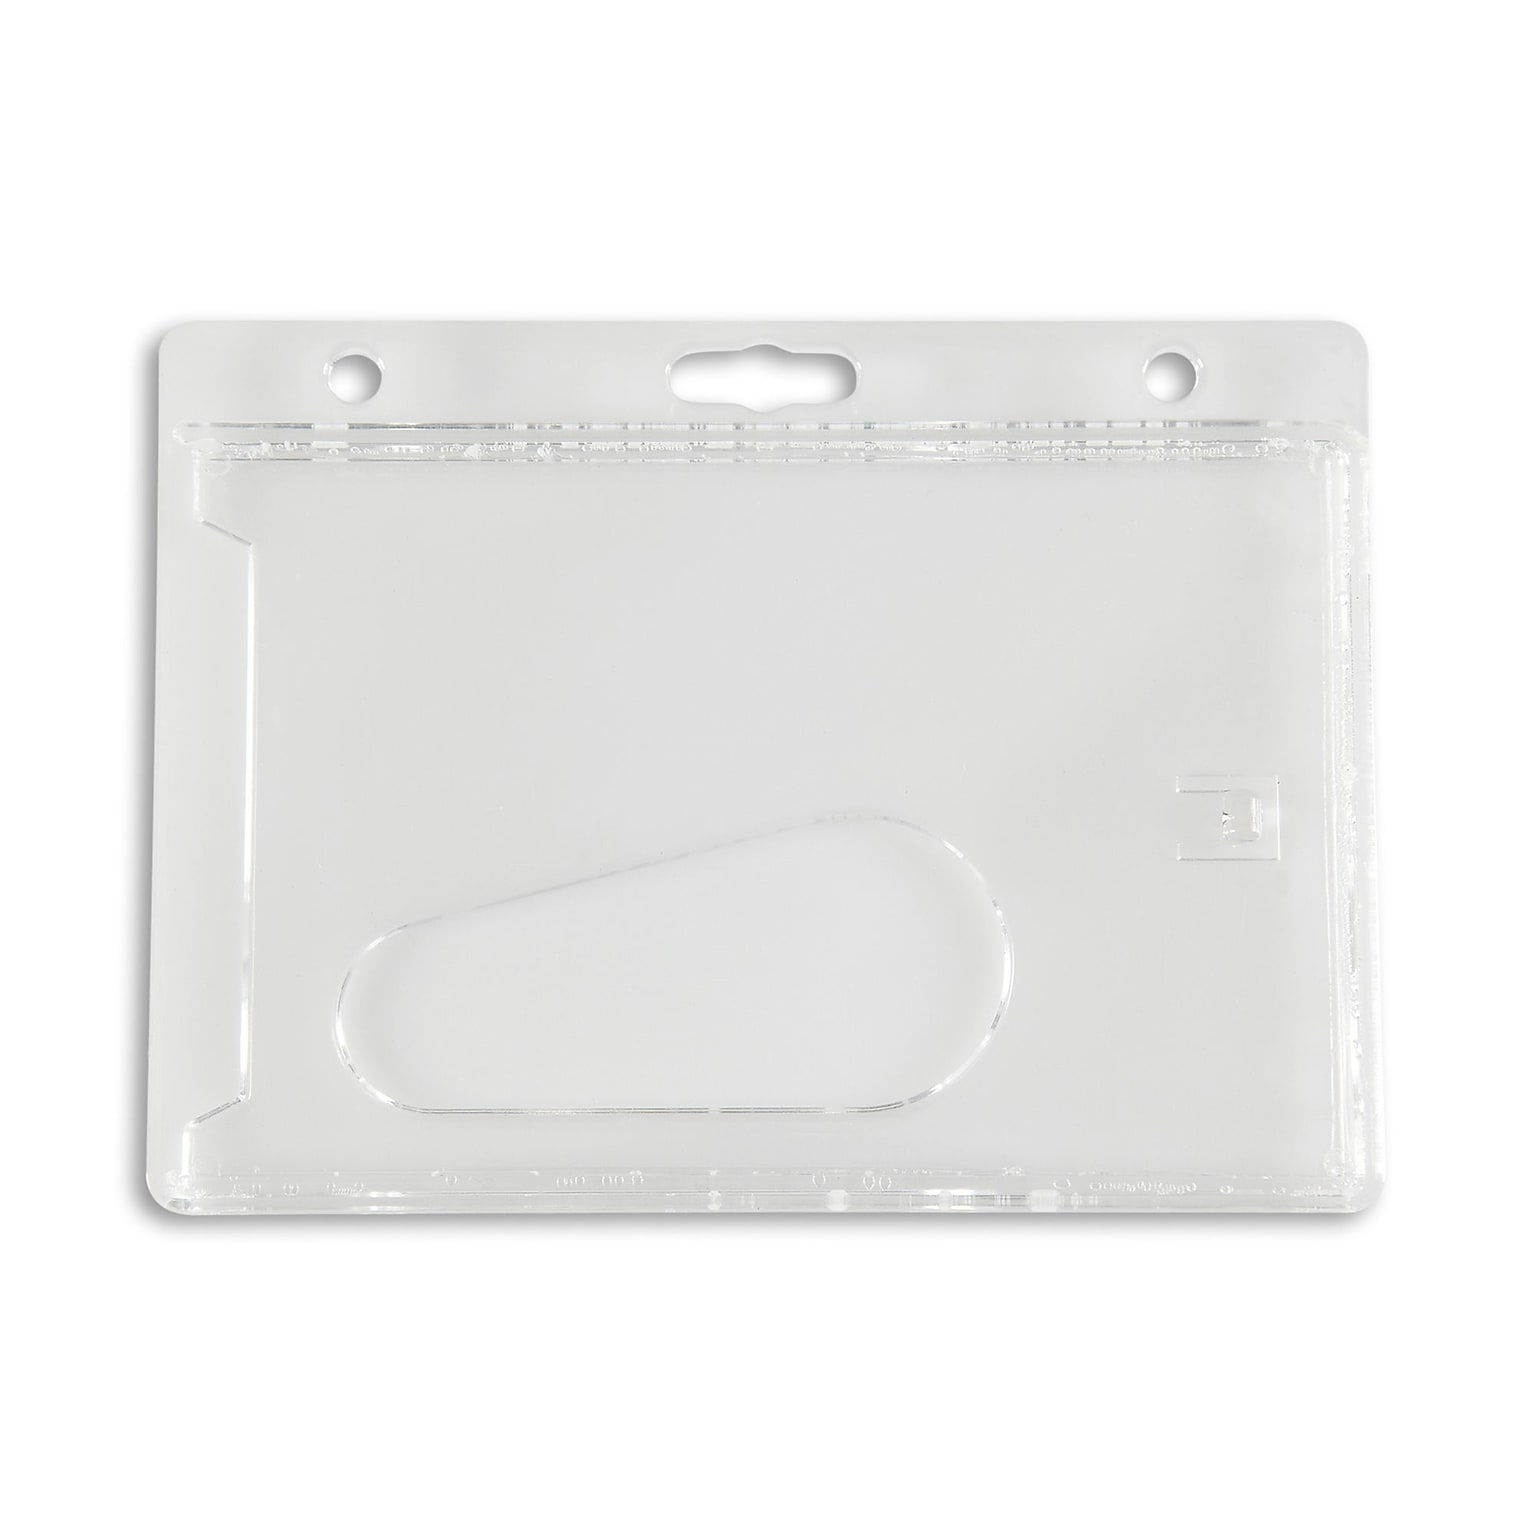 IDville Horizontal ID Badge Holders, Clear, 50/Pack (134647931)